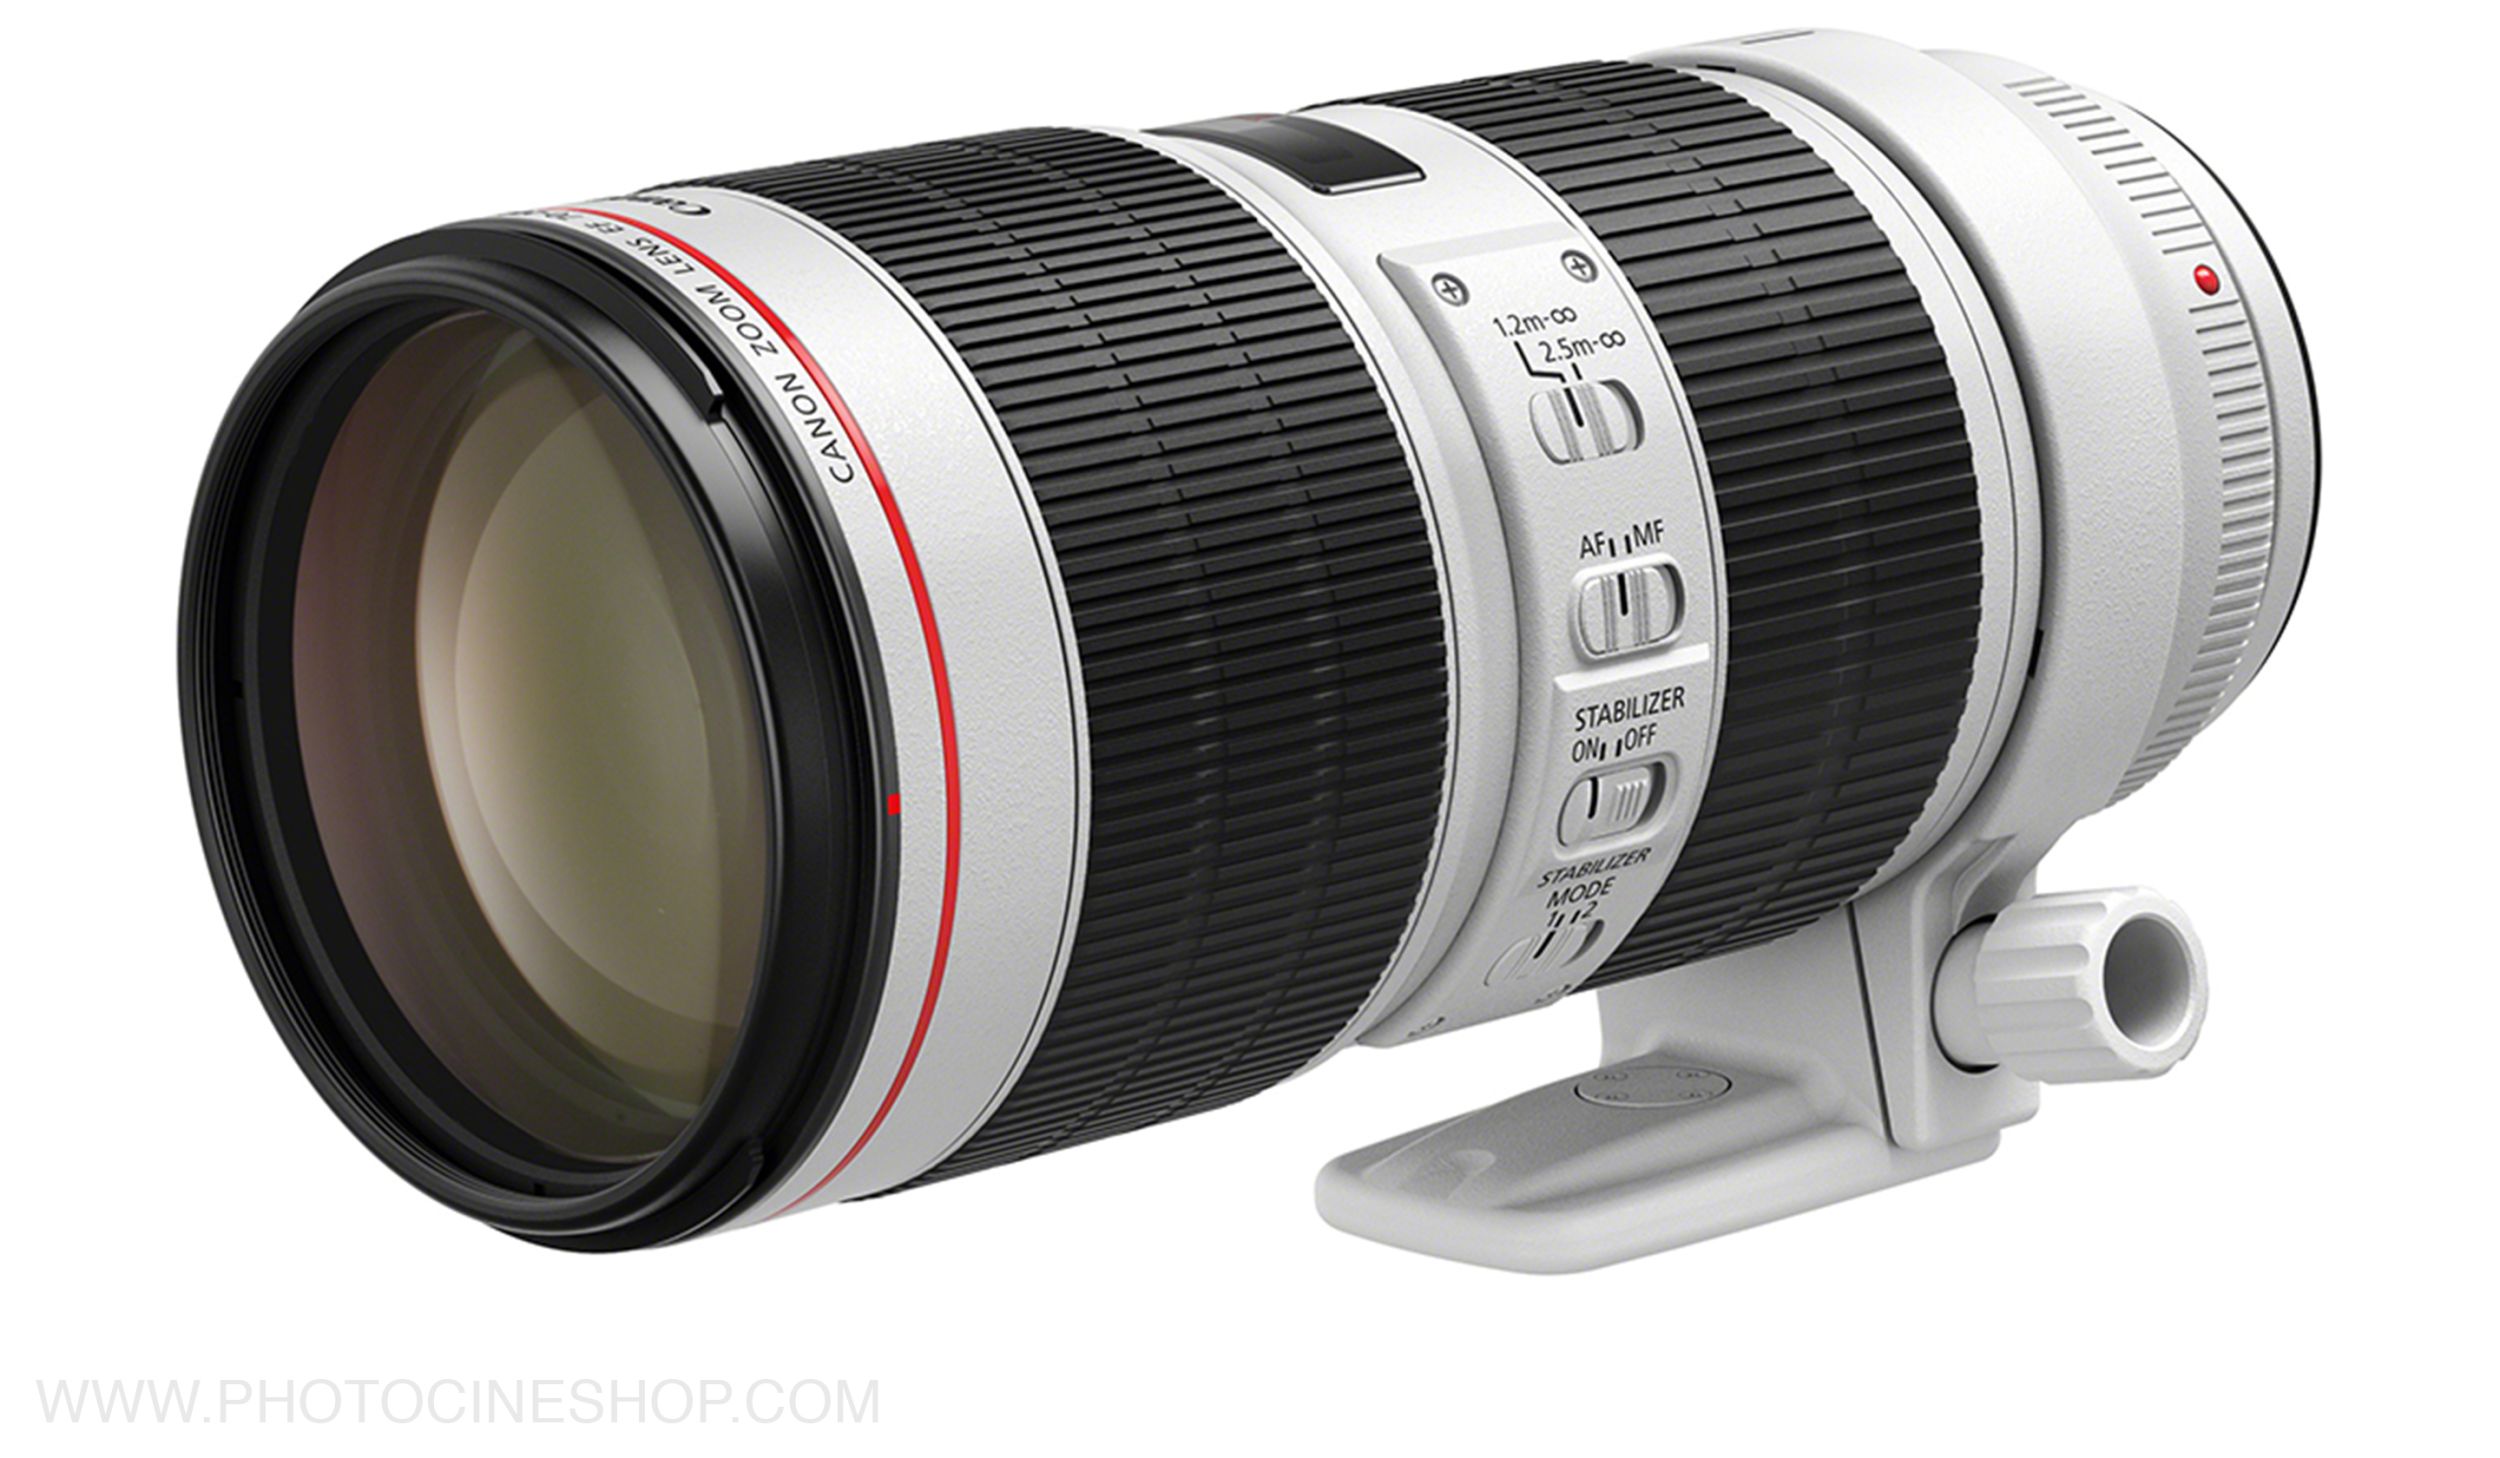 CANON - EF 70-200mm f/2.8 L IS III USM